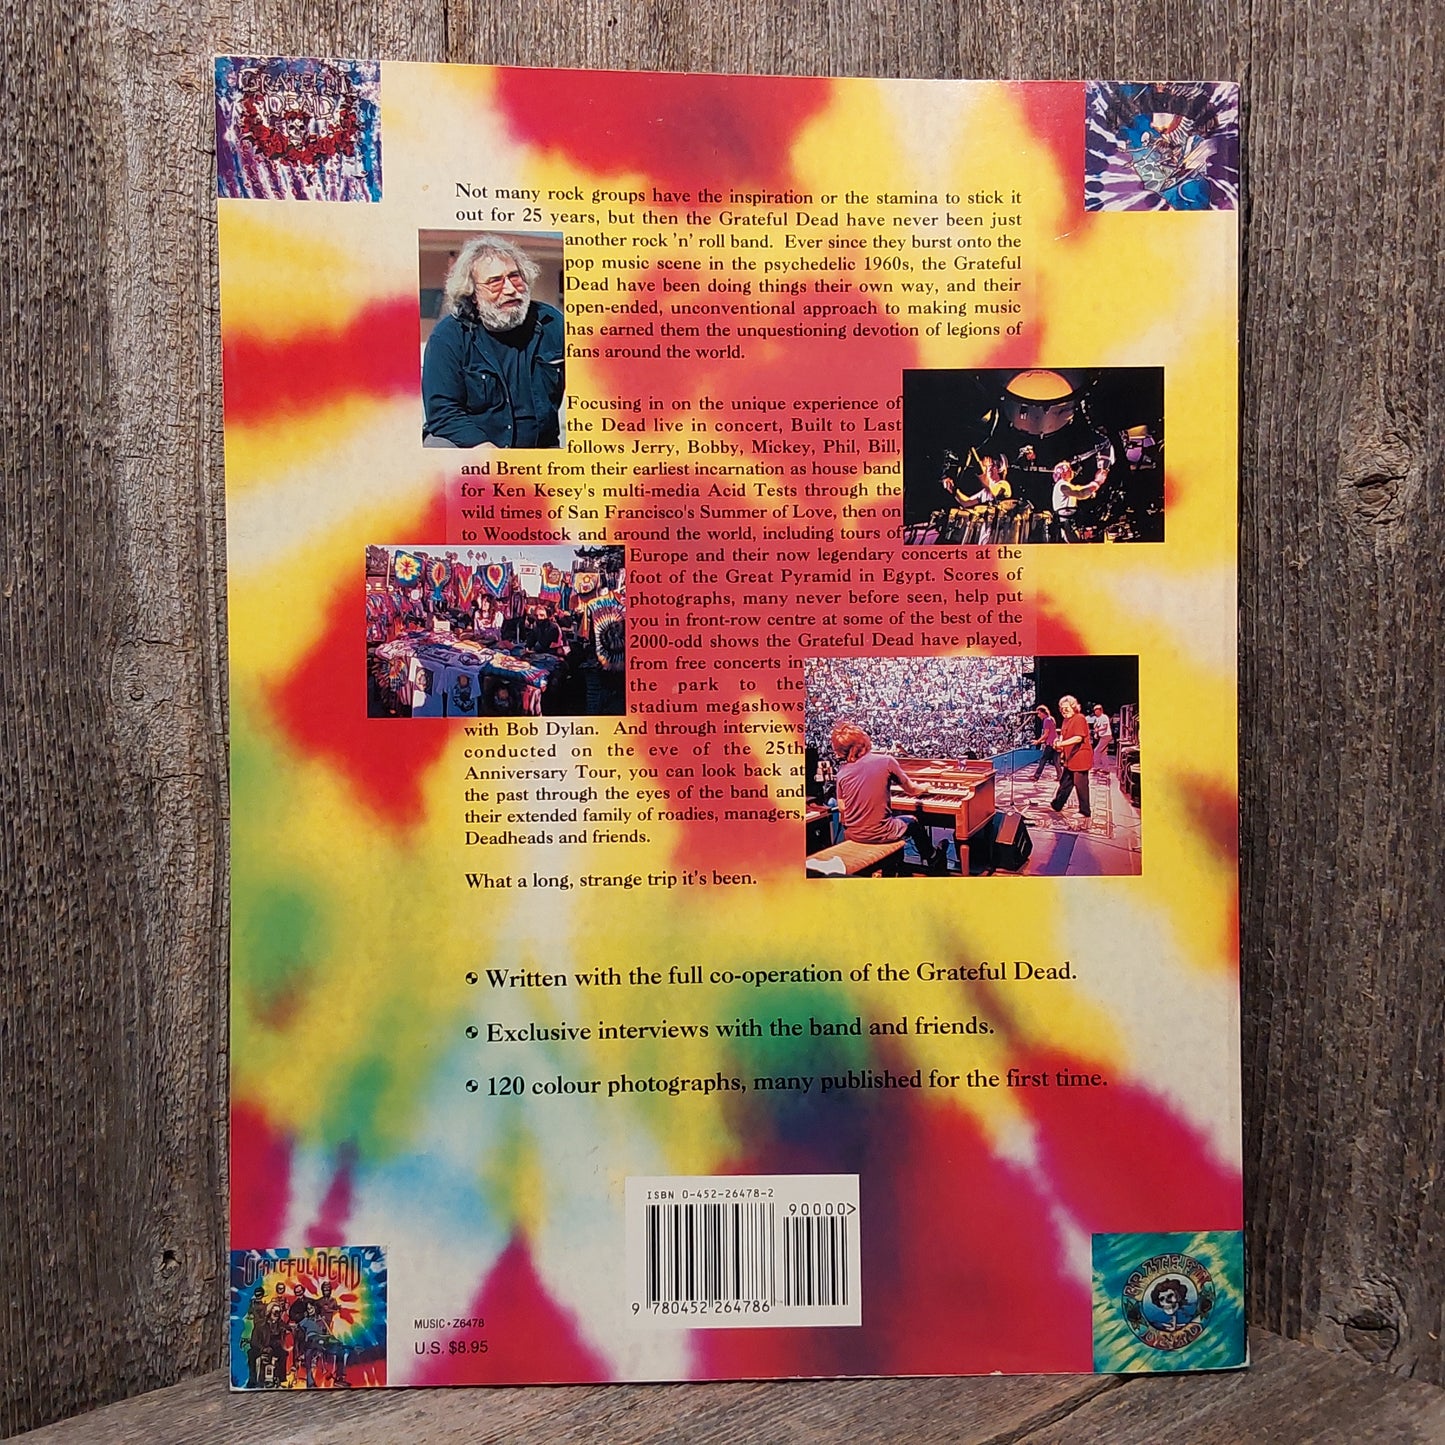 Used Built to Last Grateful Dead 25th Anniversary book by Jamie Jensen 1990 Good condition